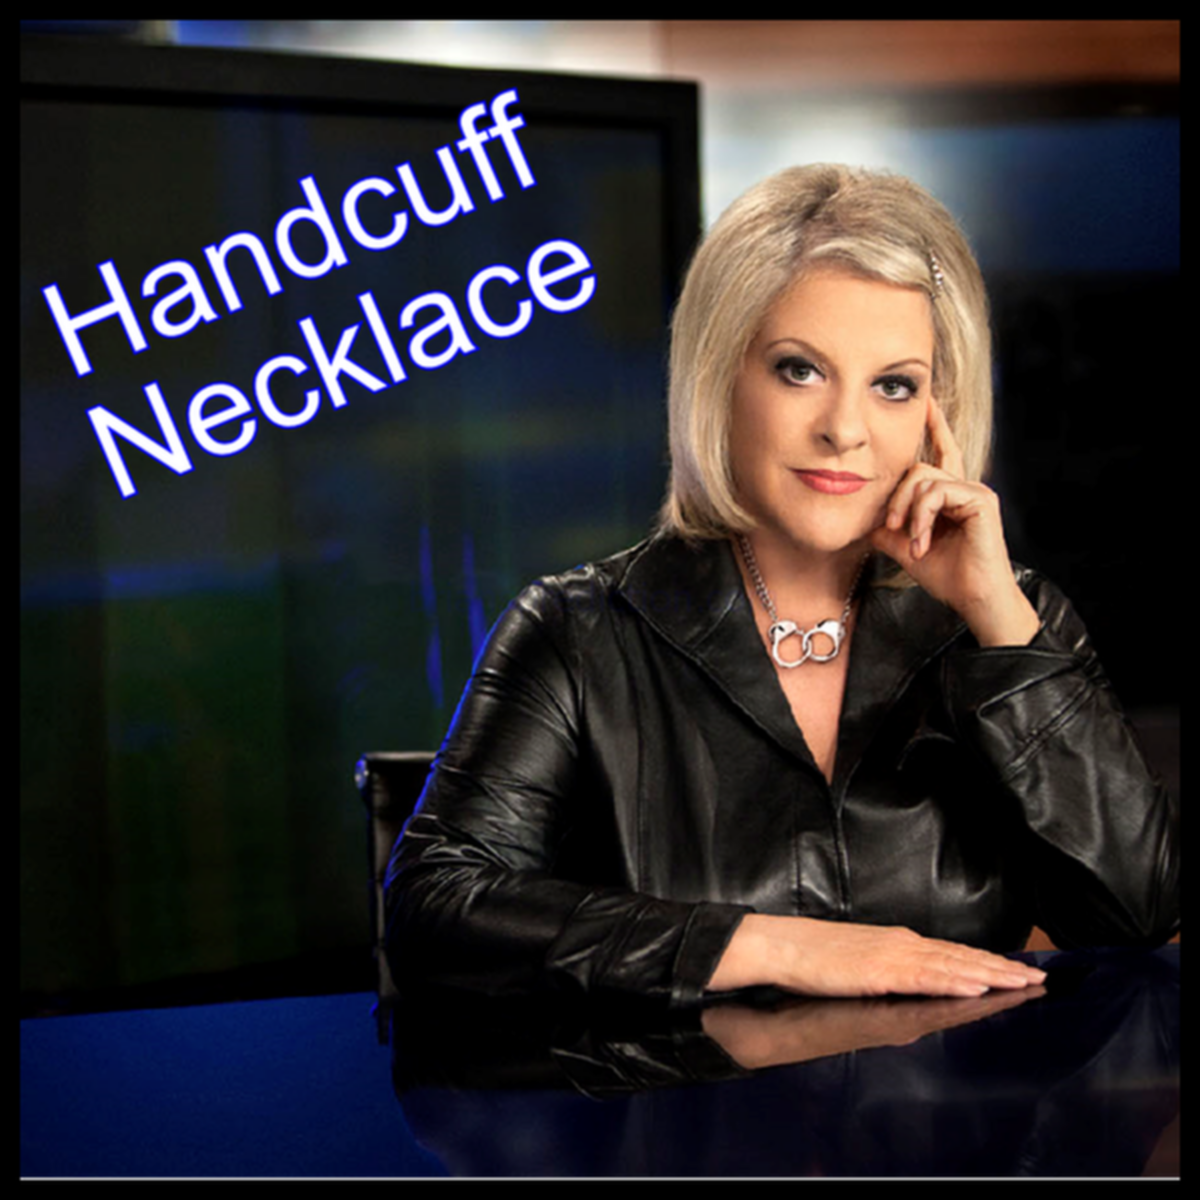 Nancy Grace Missing Person Cases Psychic Detective Brian Ladd Update On Case  Nancy-grace-handcuff-necklace-store-view-bracelet-jewelry-missing-wearing Found
Nancy Grace Missing Person Cases Psychic Detective Brian Ladd Update On Case  Nancy-grace-handcuff-necklace-store-view-bracelet-jewelry-missing-wearing Found
